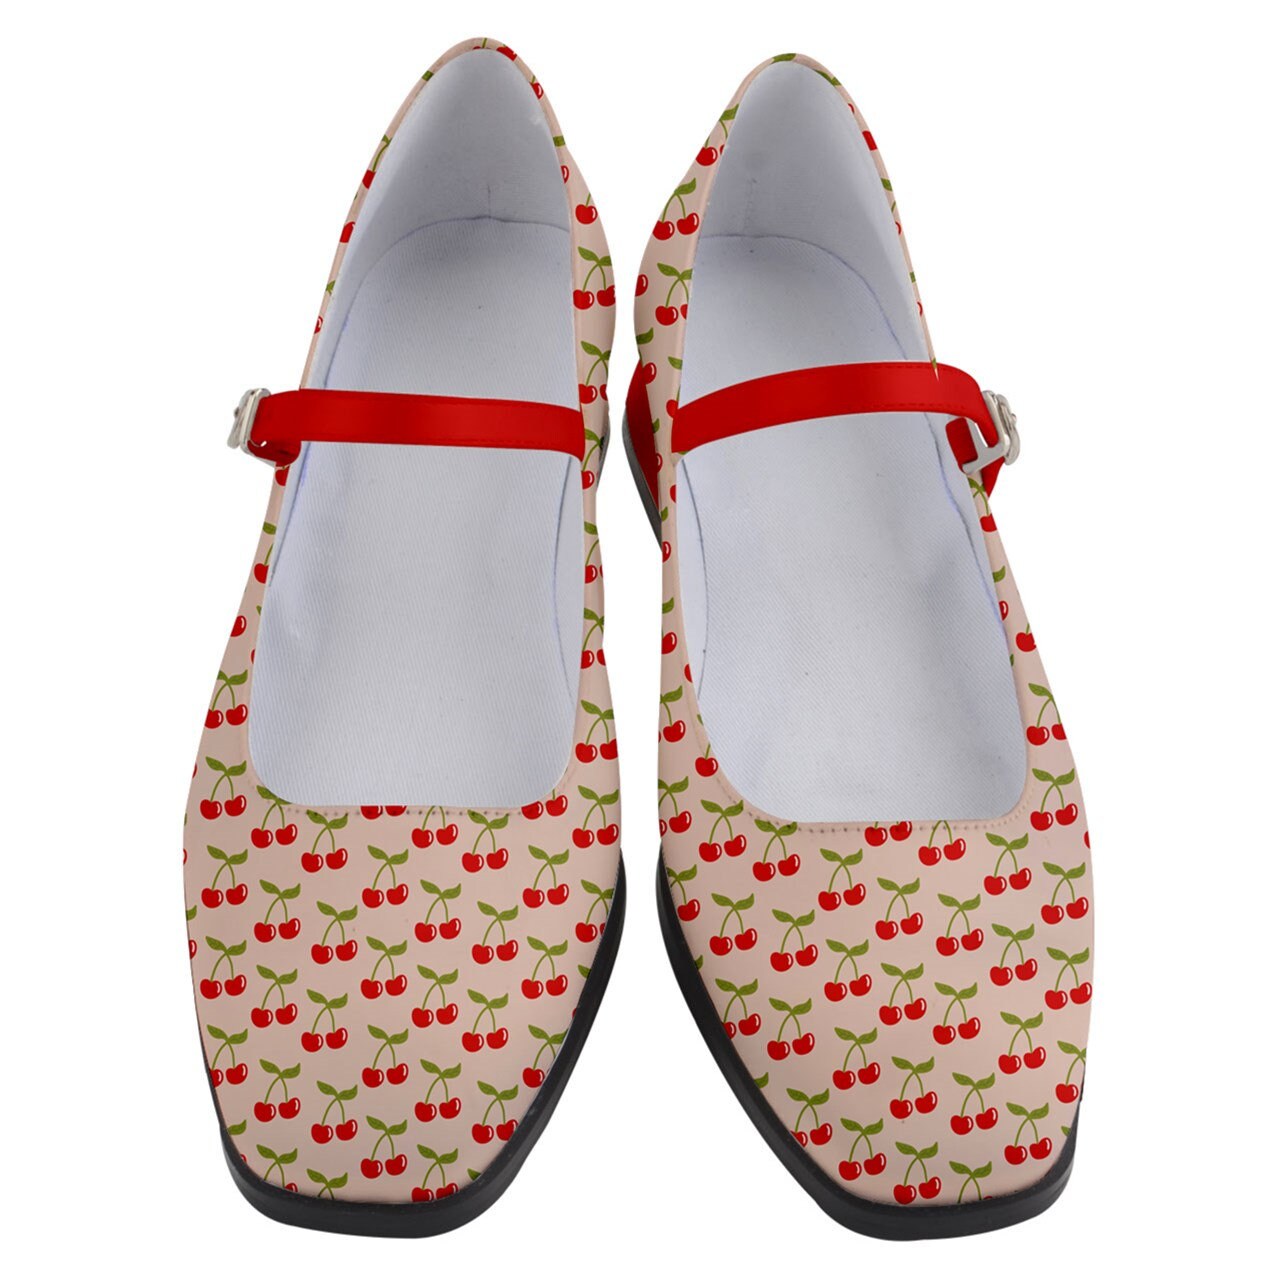 Mary Jane Shoes, Women's Mary Jane Shoes, Pin Up Shoes, Mary Jane Shoes Women, Cherry Shoes Women, Retro Shoes Women, Vintage Mary Jane